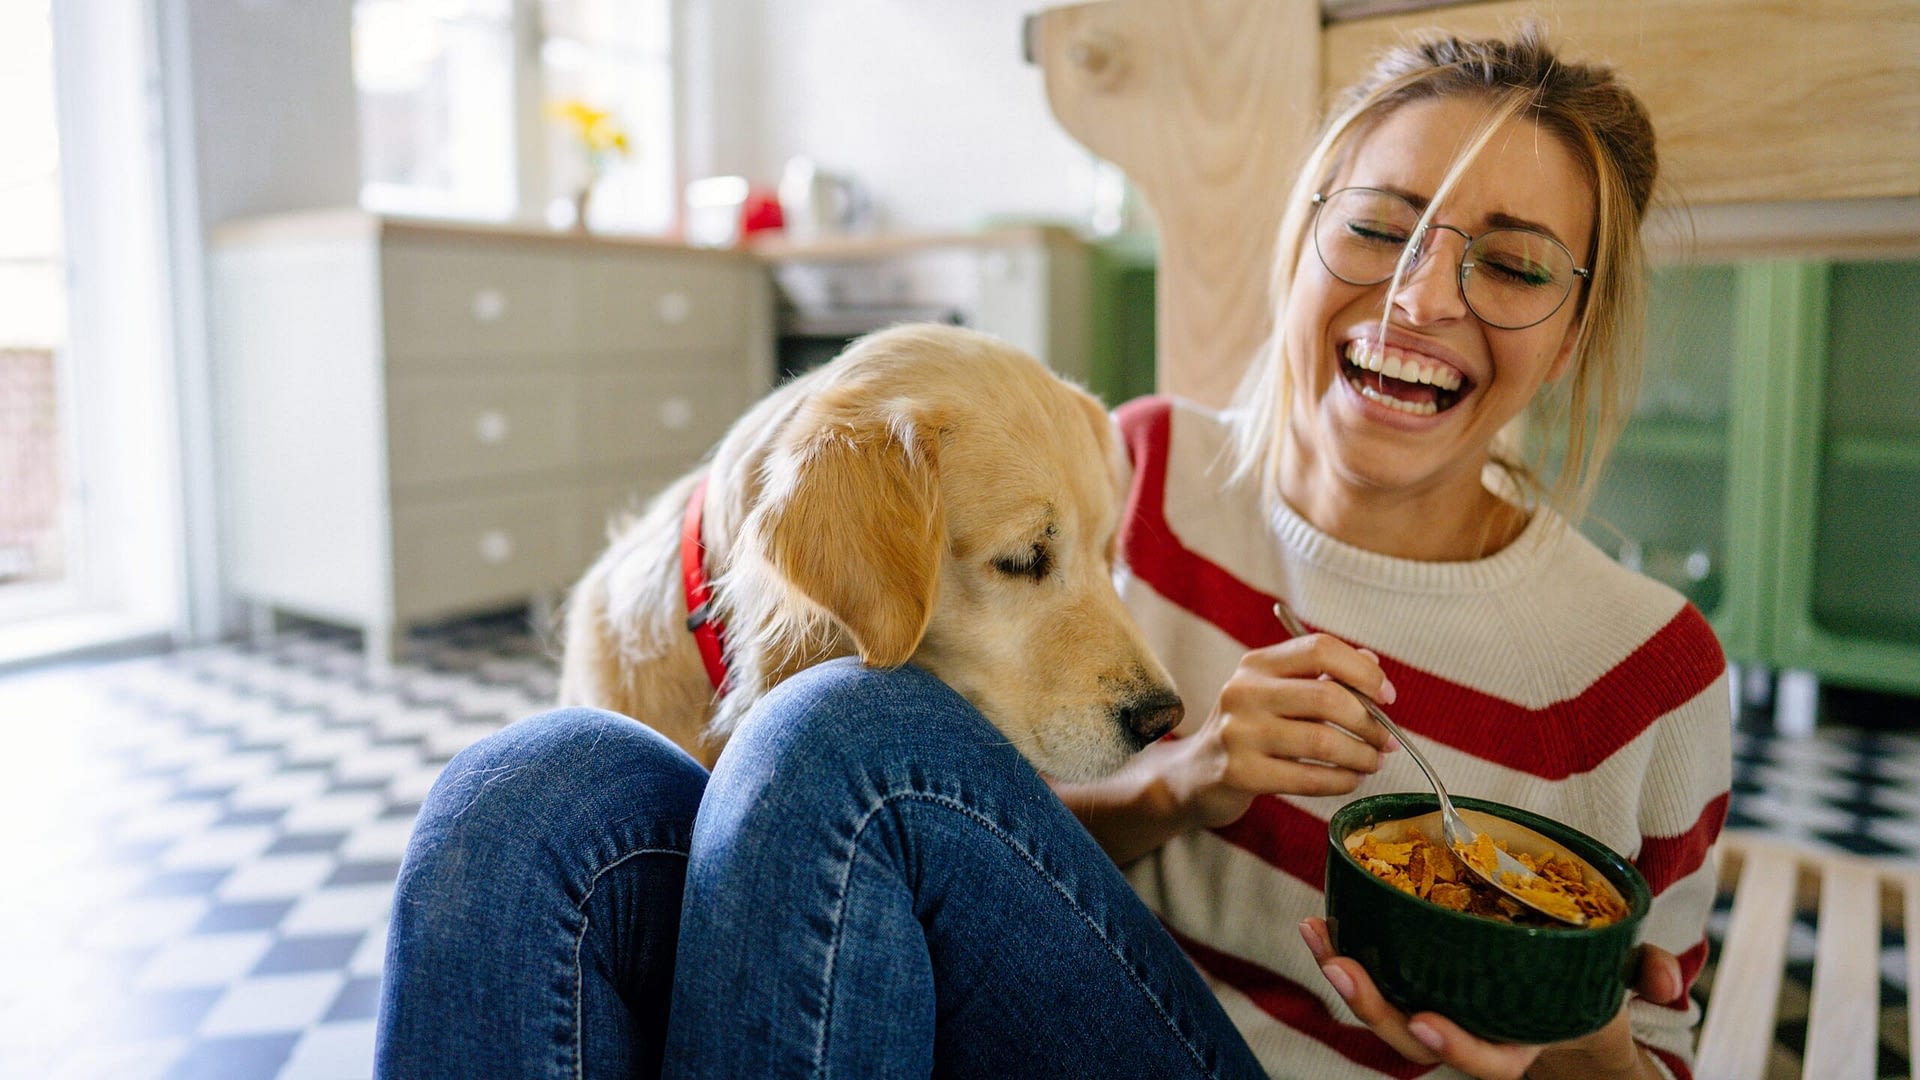 Young adult woman laughing and sitting on the floor with her dog while holding a bowl of food.